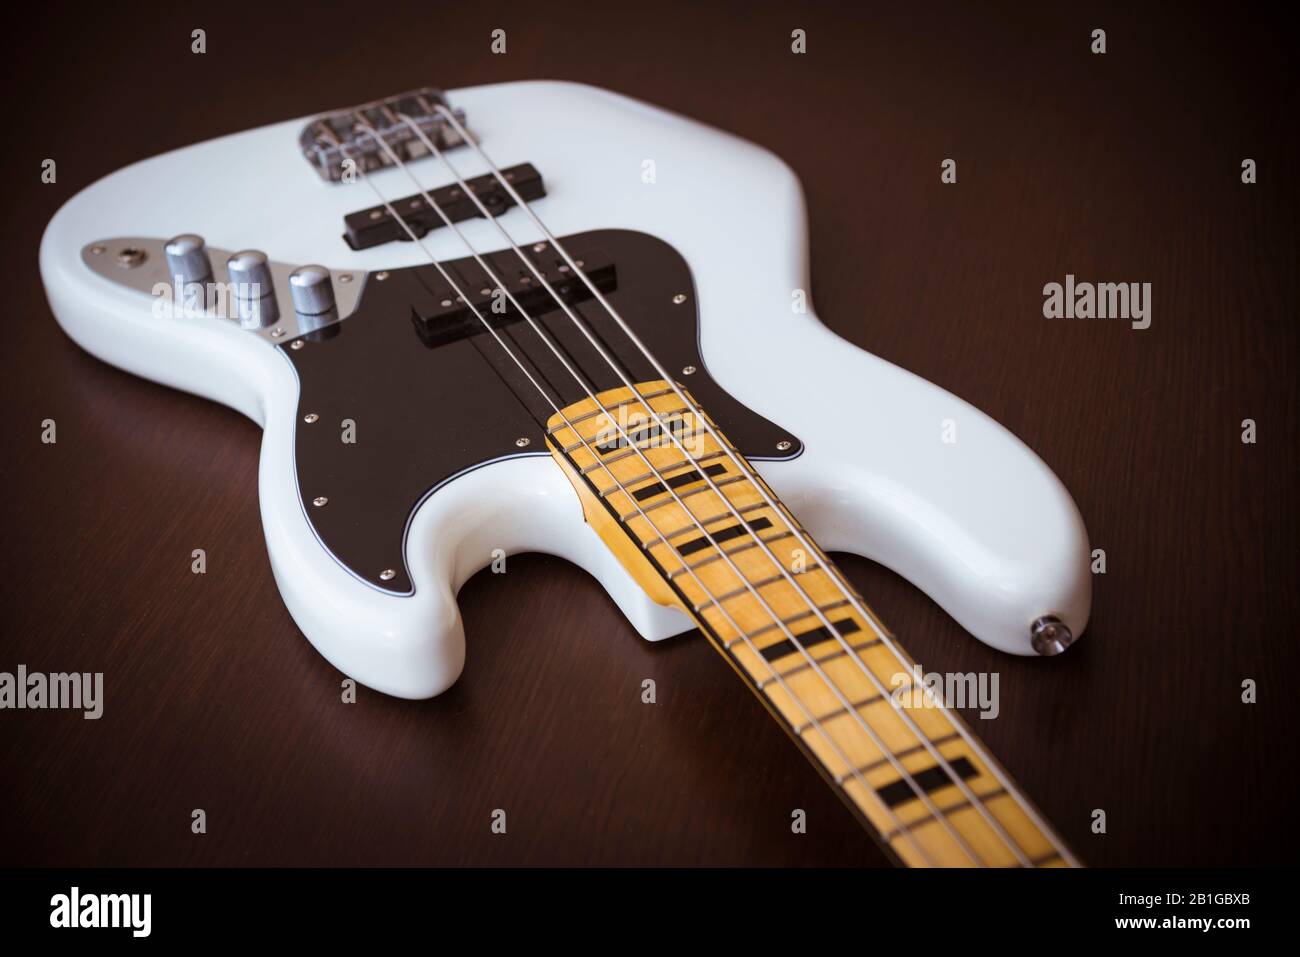 White Electric Bass Guitar with Maple Neck, Black Pickguard, and Black Block Inlays on a Simple Wooden Background Stock Photo